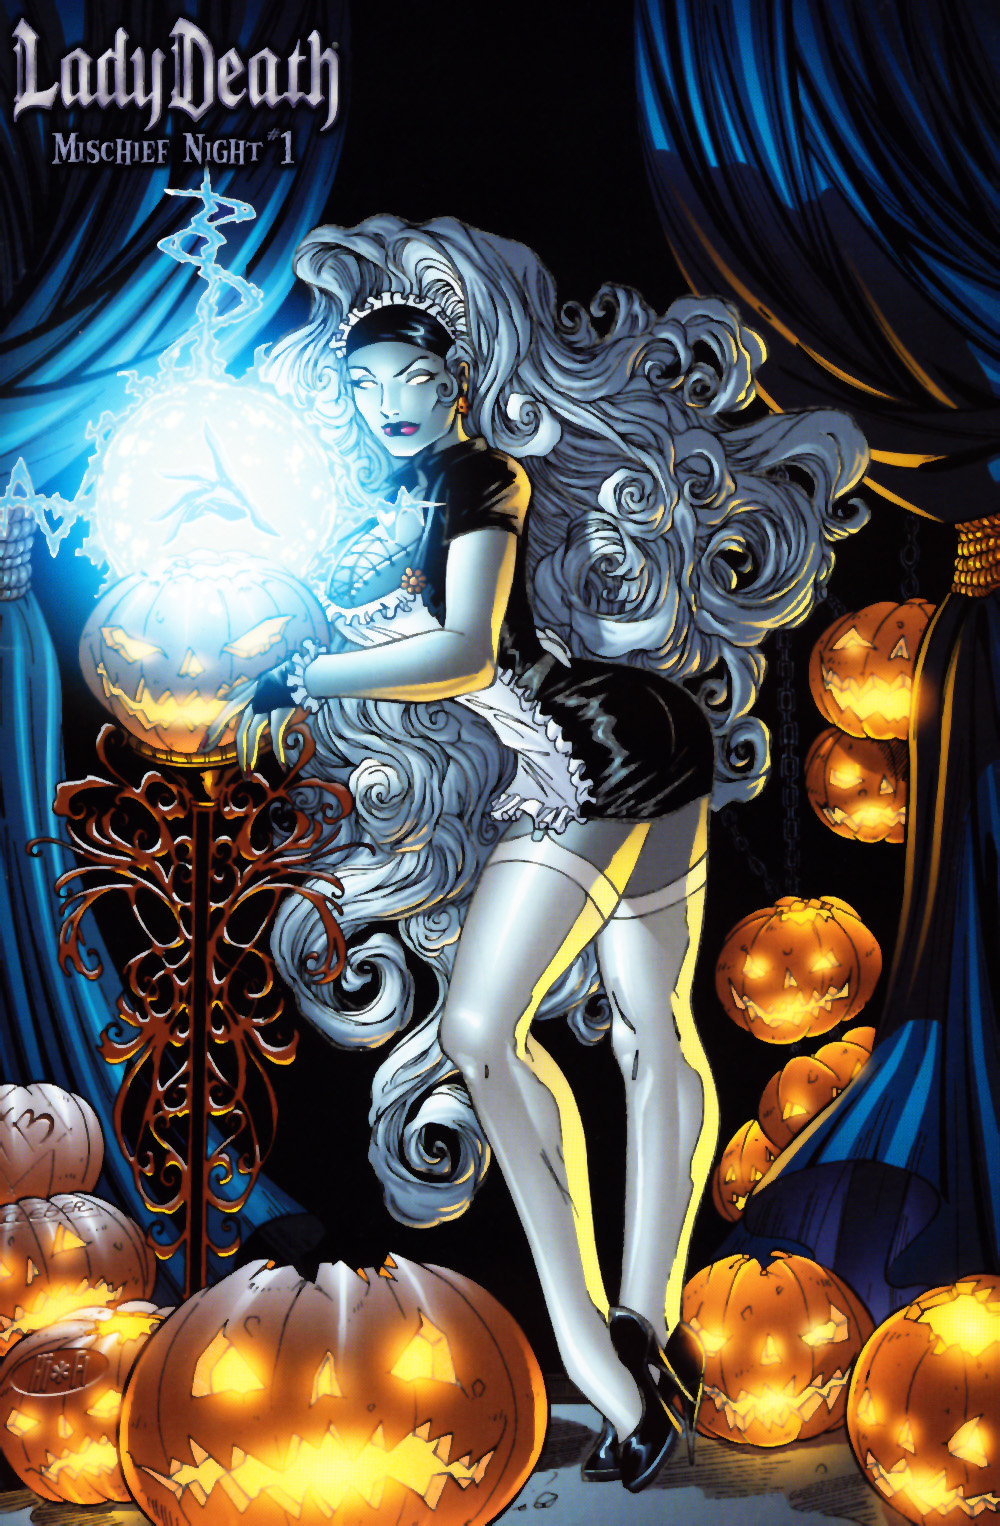 Read online Lady Death: Mischief Night comic -  Issue # Full - 3